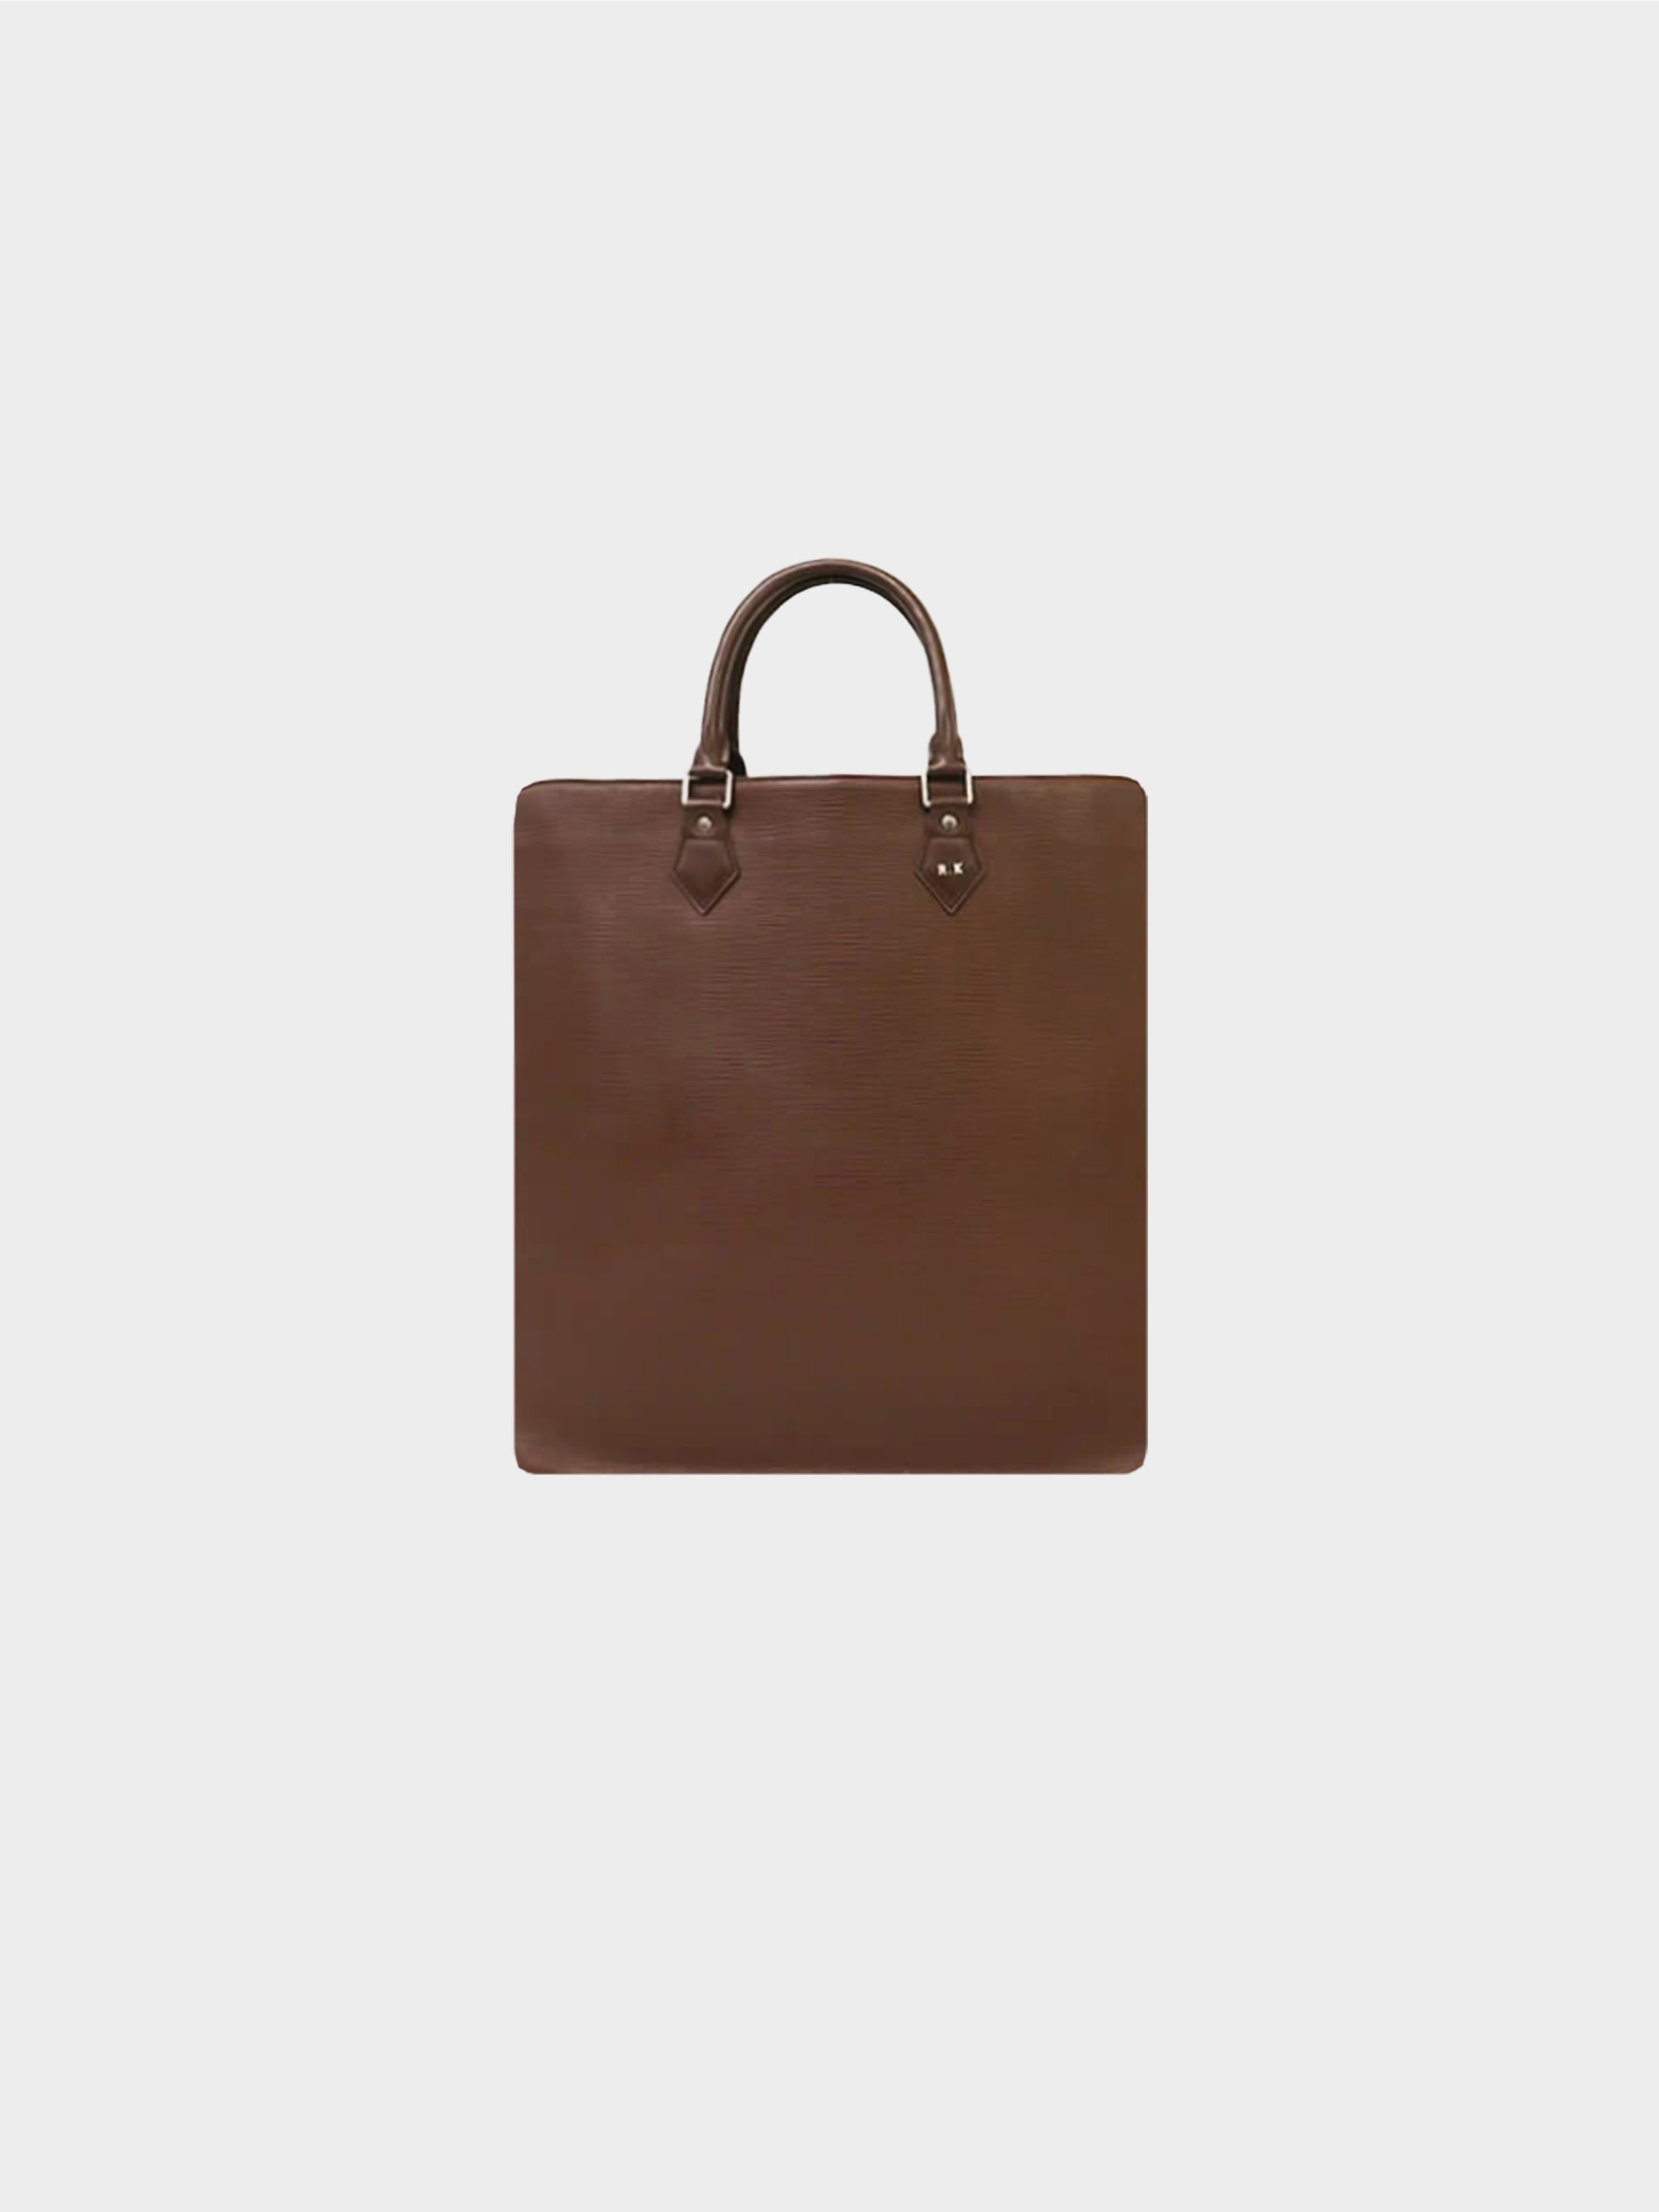 Louis Vuitton Sac Plat Tote PM Brown Leather for sale online